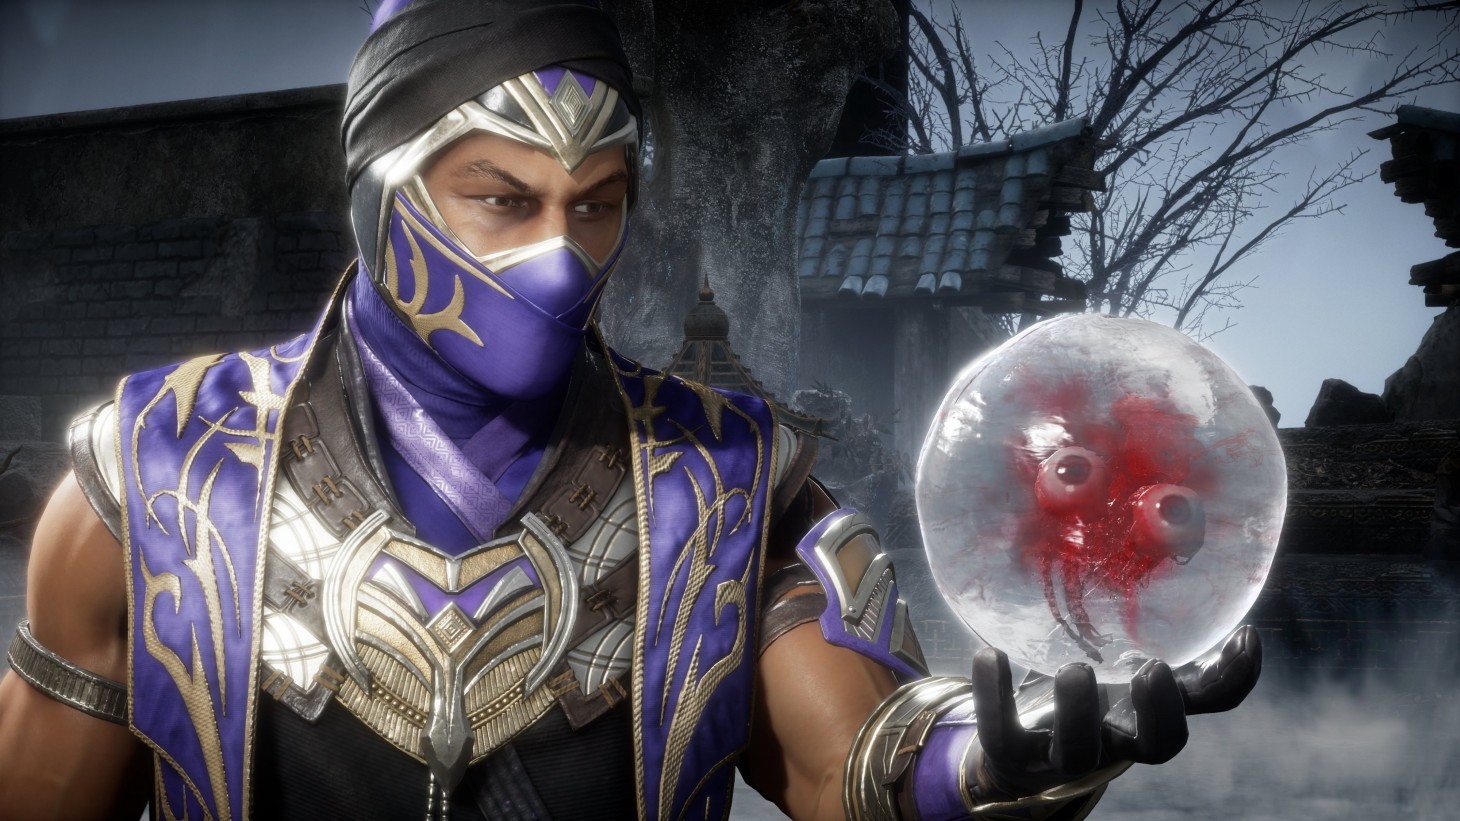 How Much Is Mortal Kombat 11 On PS5